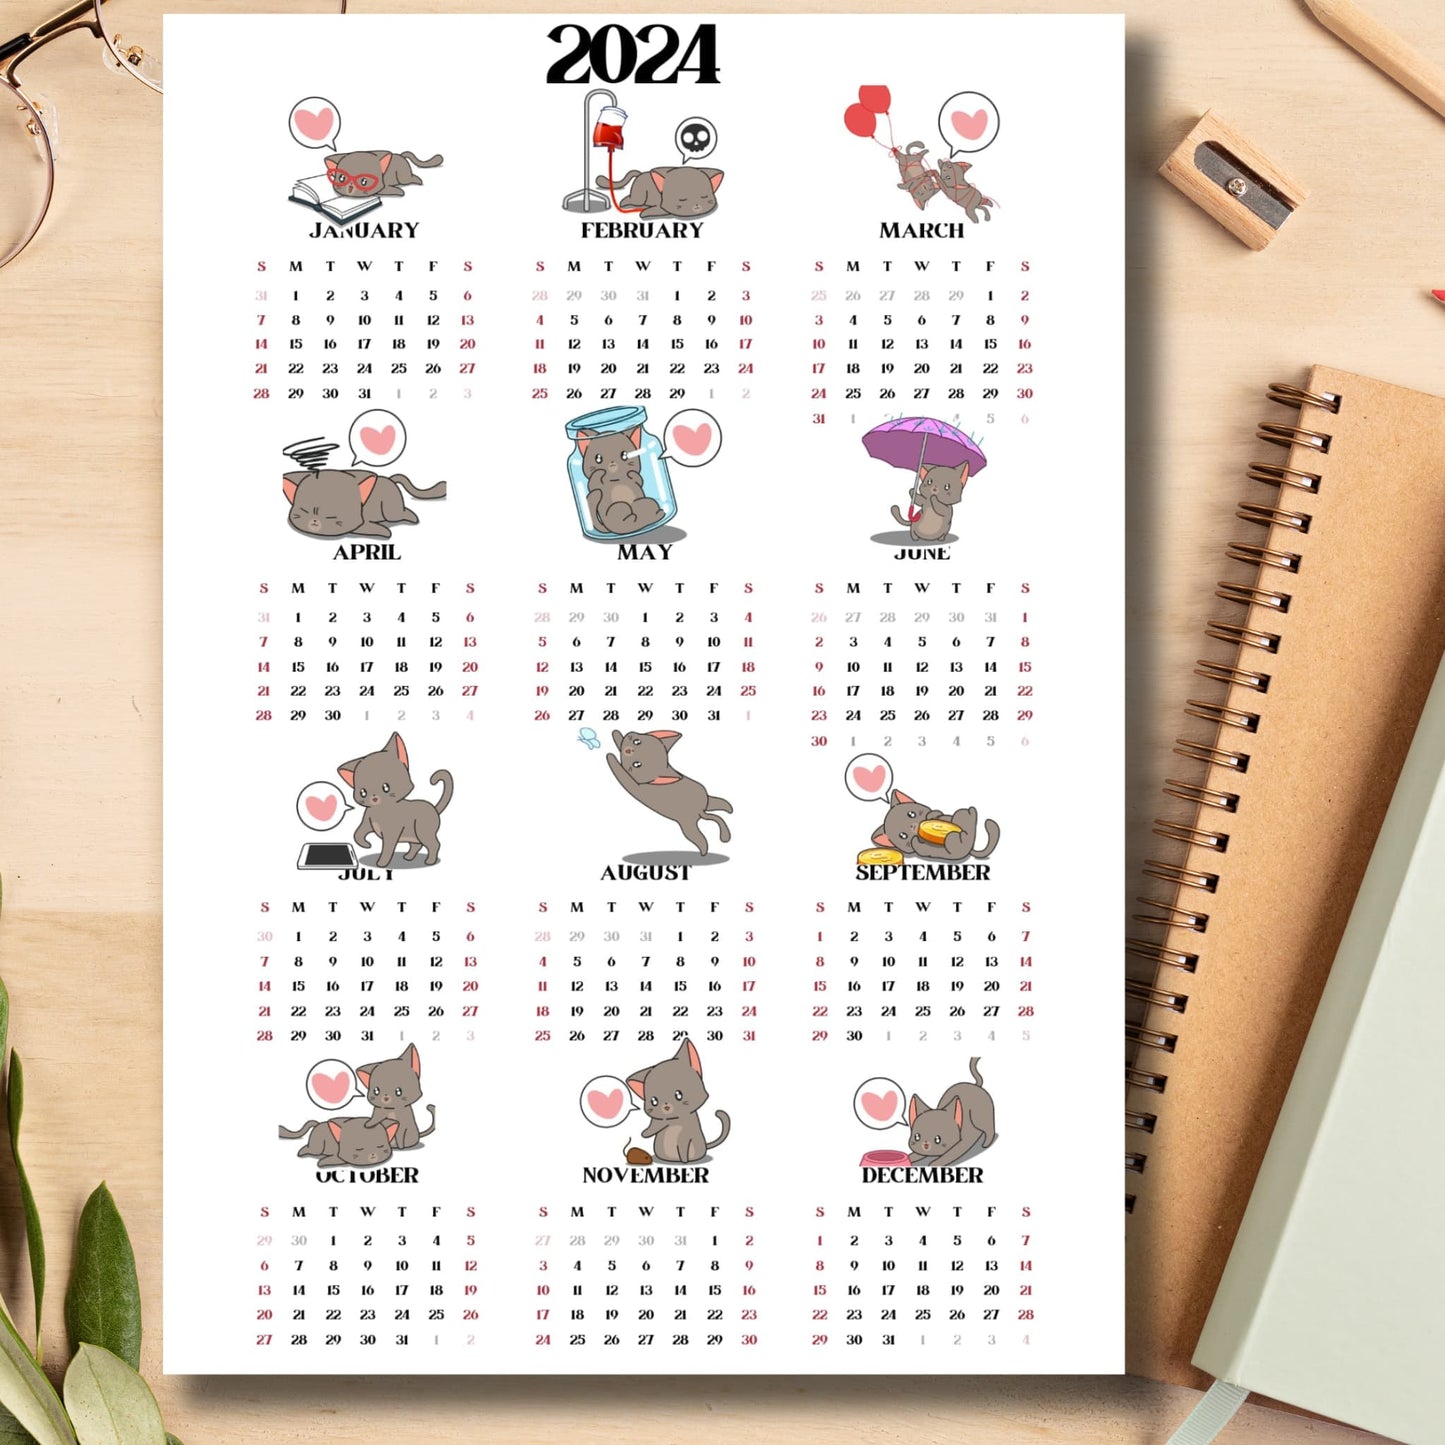 Cute cat illustrated 2024 calendar on light brown wooden desk with school supplies like notebook, pencil, sharpener.